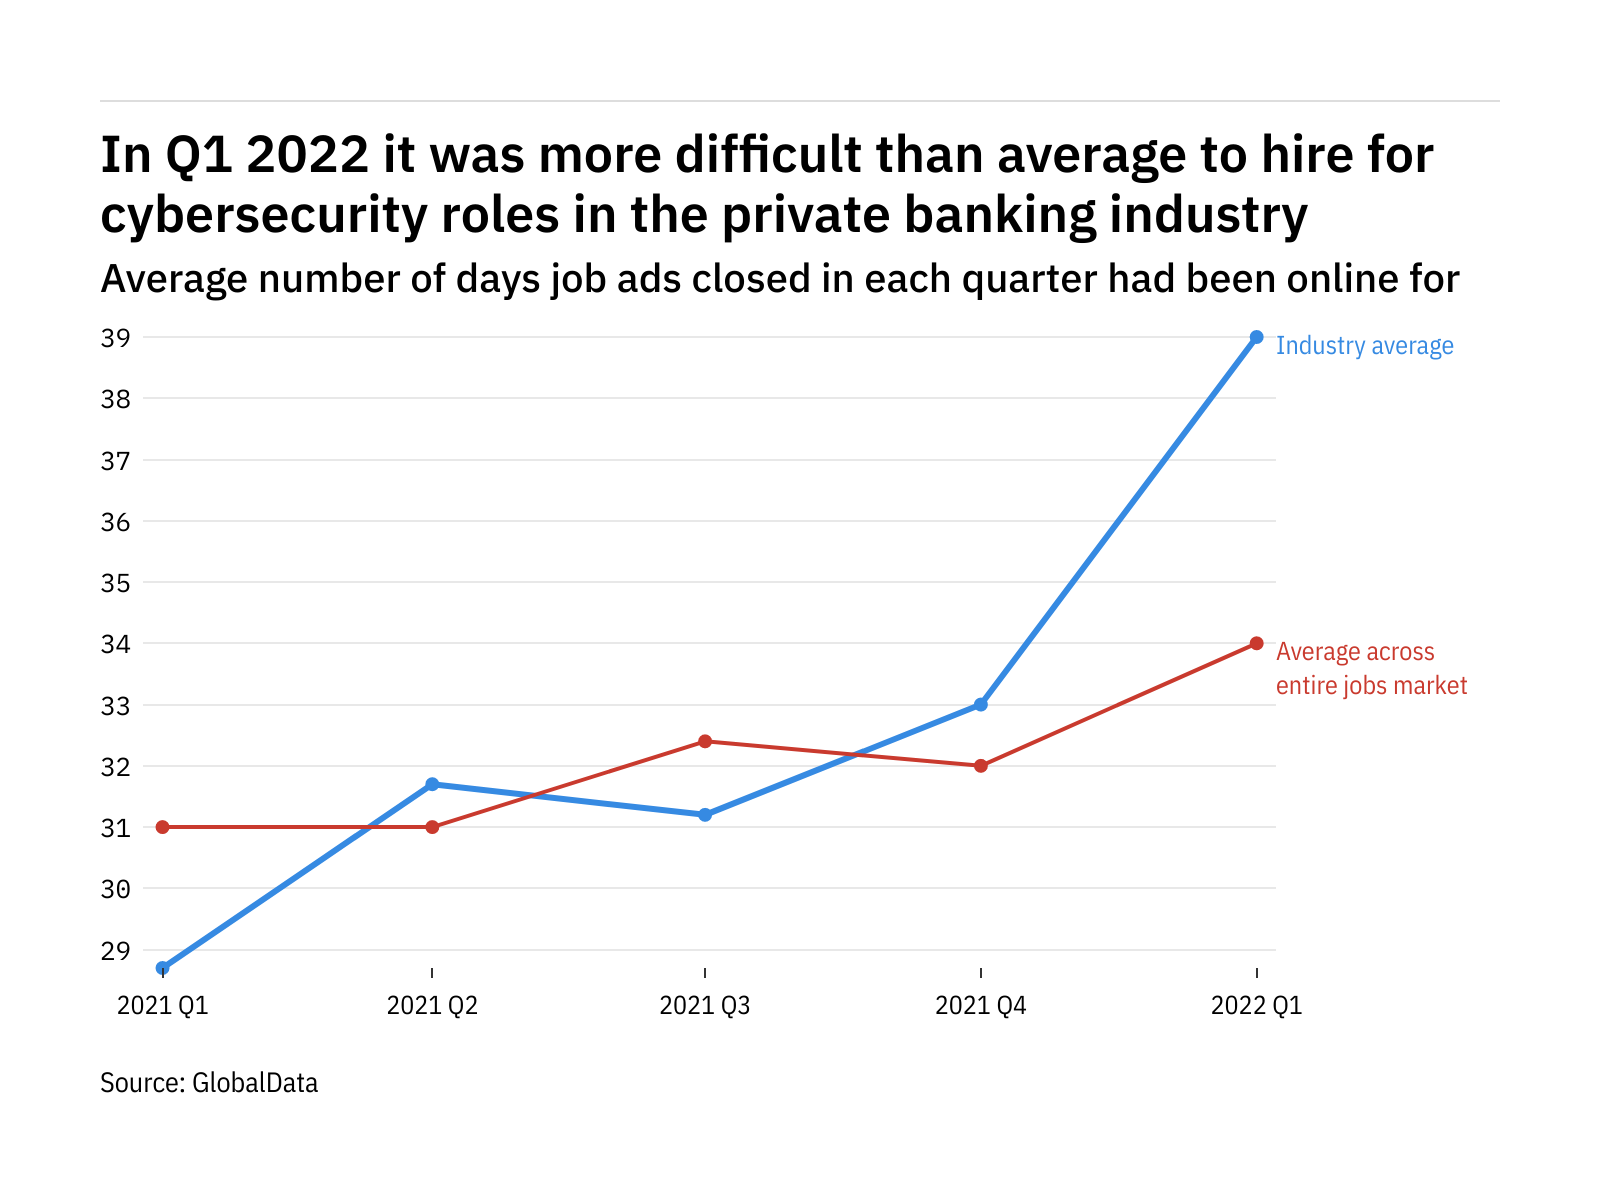 The private banking industry found it harder to fill cybersecurity vacancies in Q1 2022